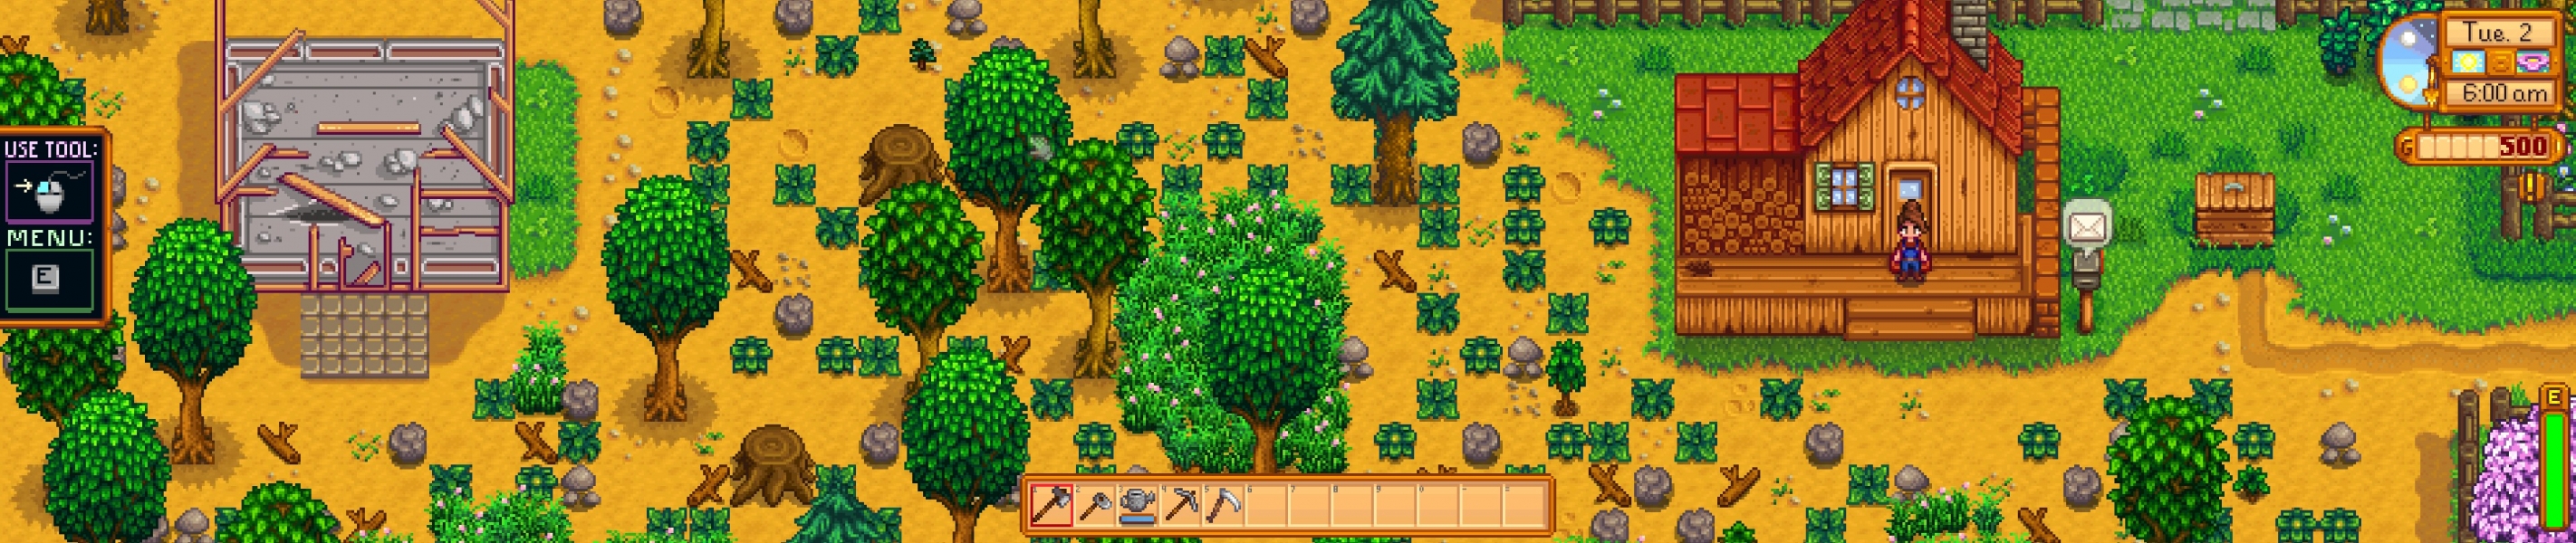 Stardew Valley - Stardew Valley Dual Monitor , HD Wallpaper & Backgrounds